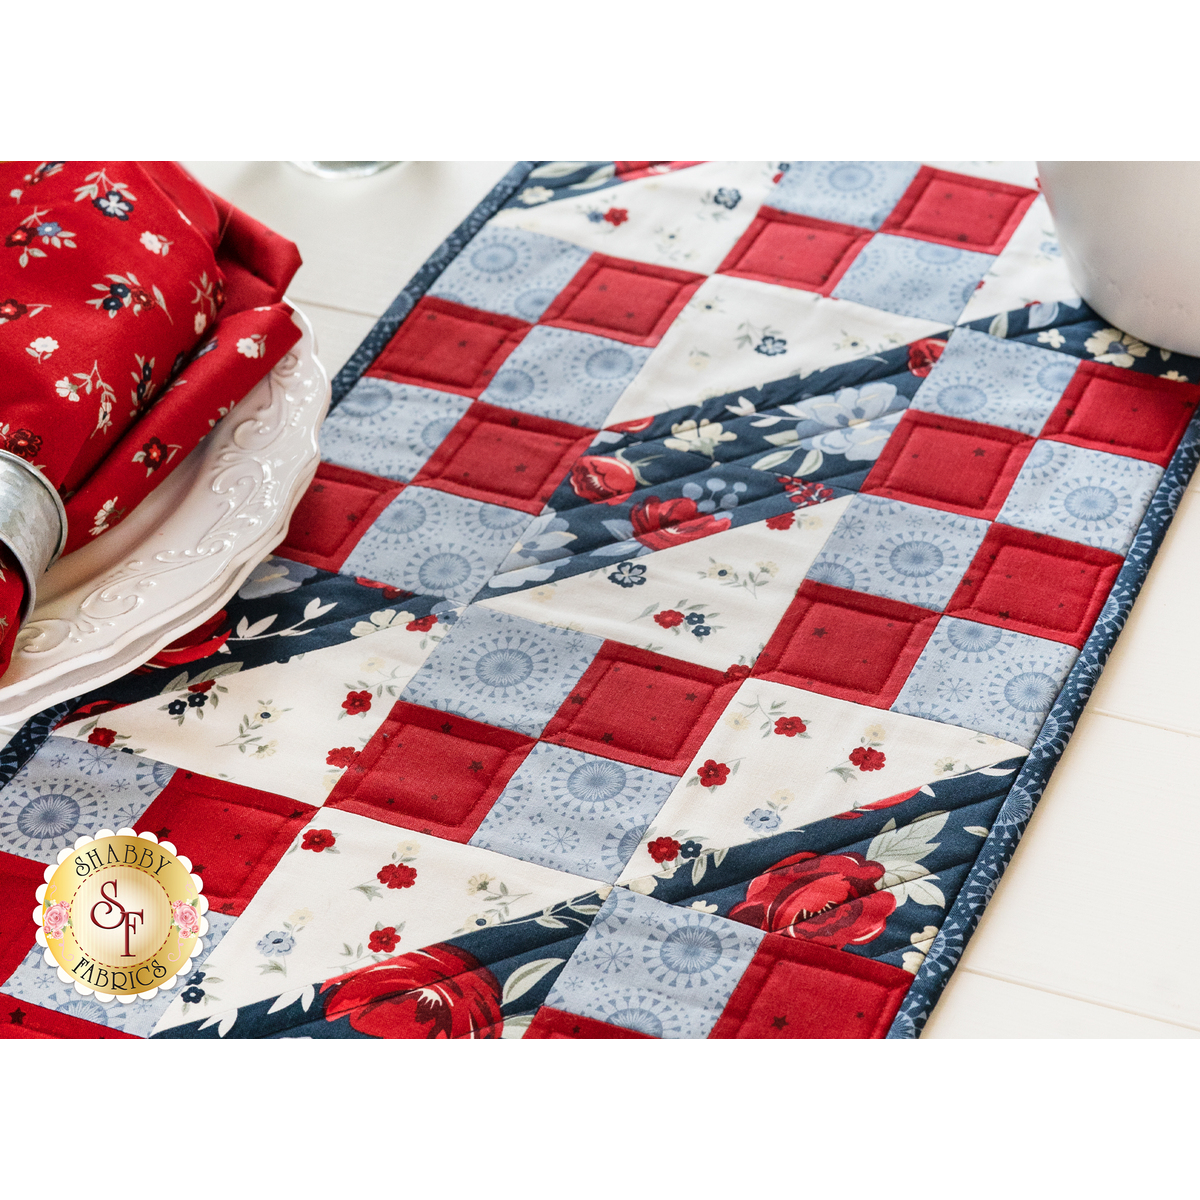 Details about   60 inch American Dream Table Runner 